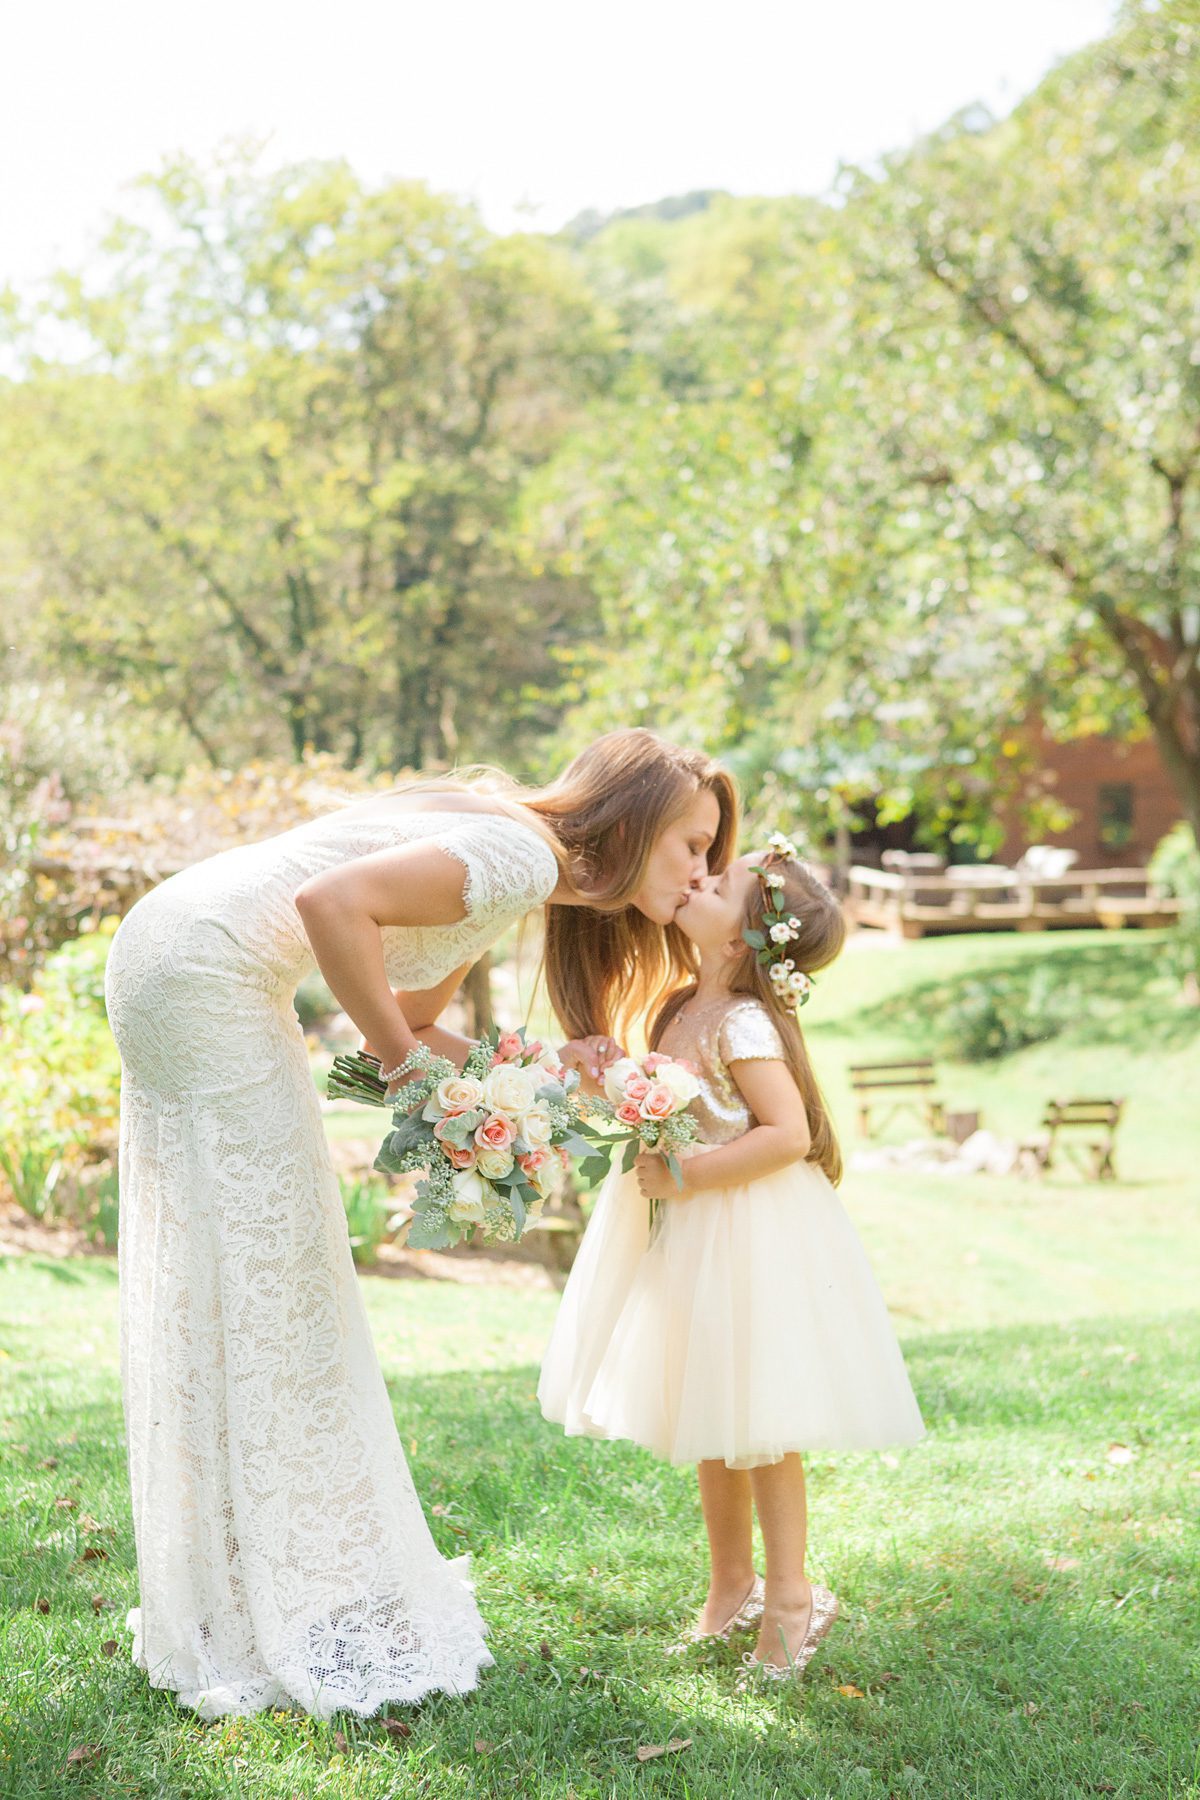 Mom and daughter share a sweet moment before wedding ceremony at Butterfly Hollow wedding in Gordonsville, TN / Photography by Krista Lee